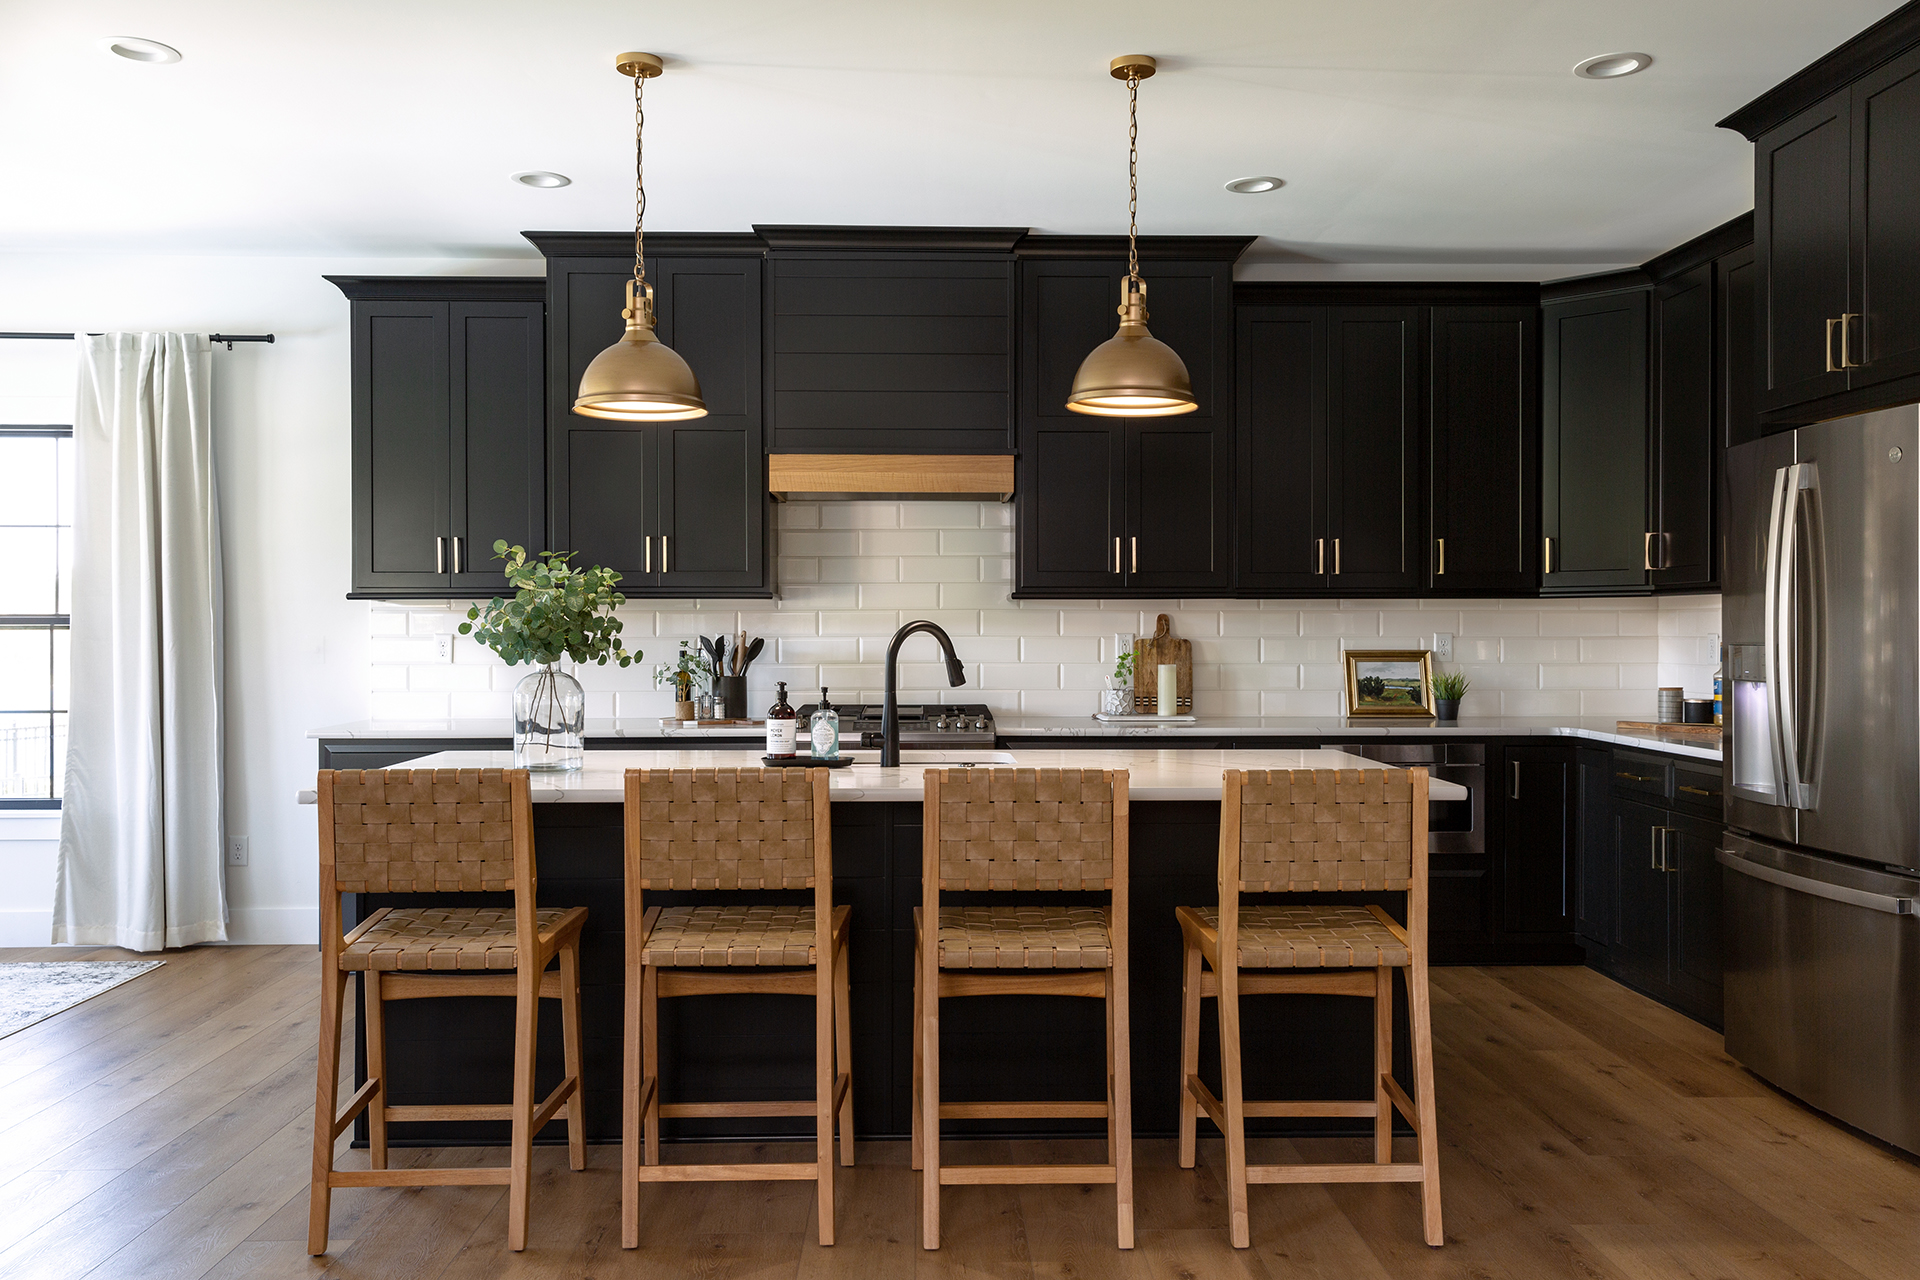 Black kitchen cabinets with natural wood accents